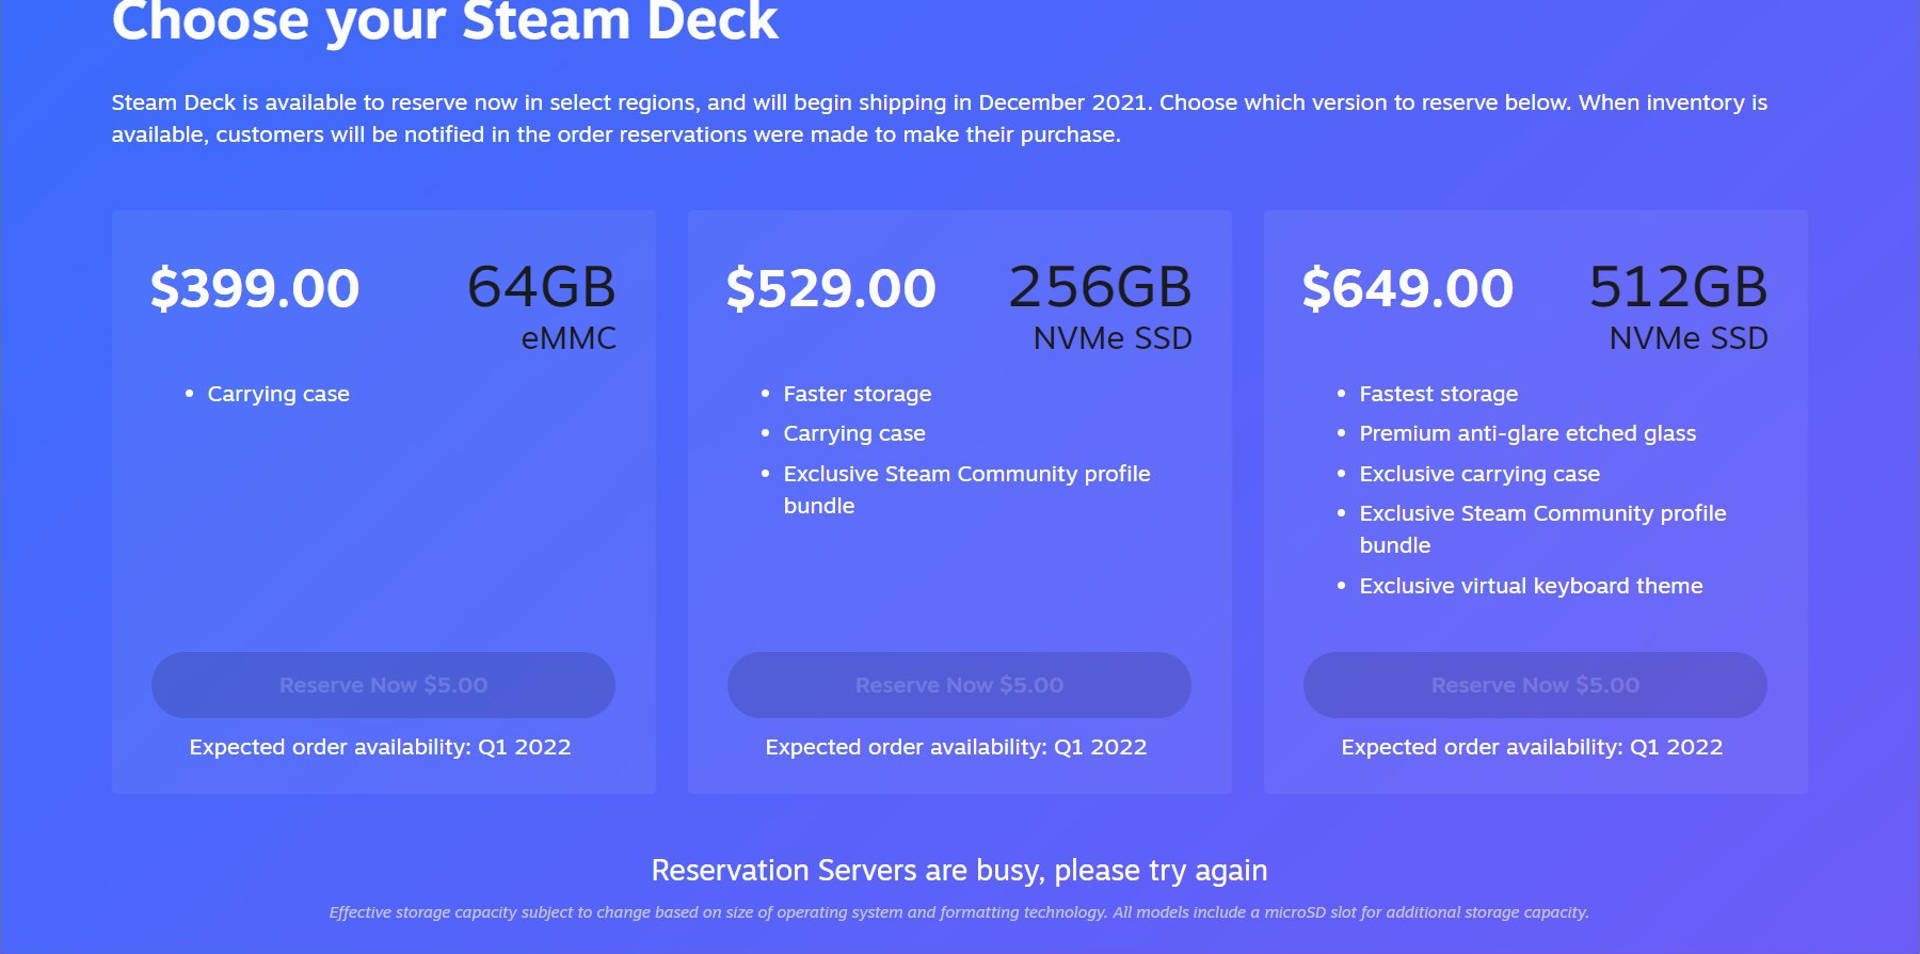 It Looks Like Steam Deck Reservations Have Sold Out | TechRaptor